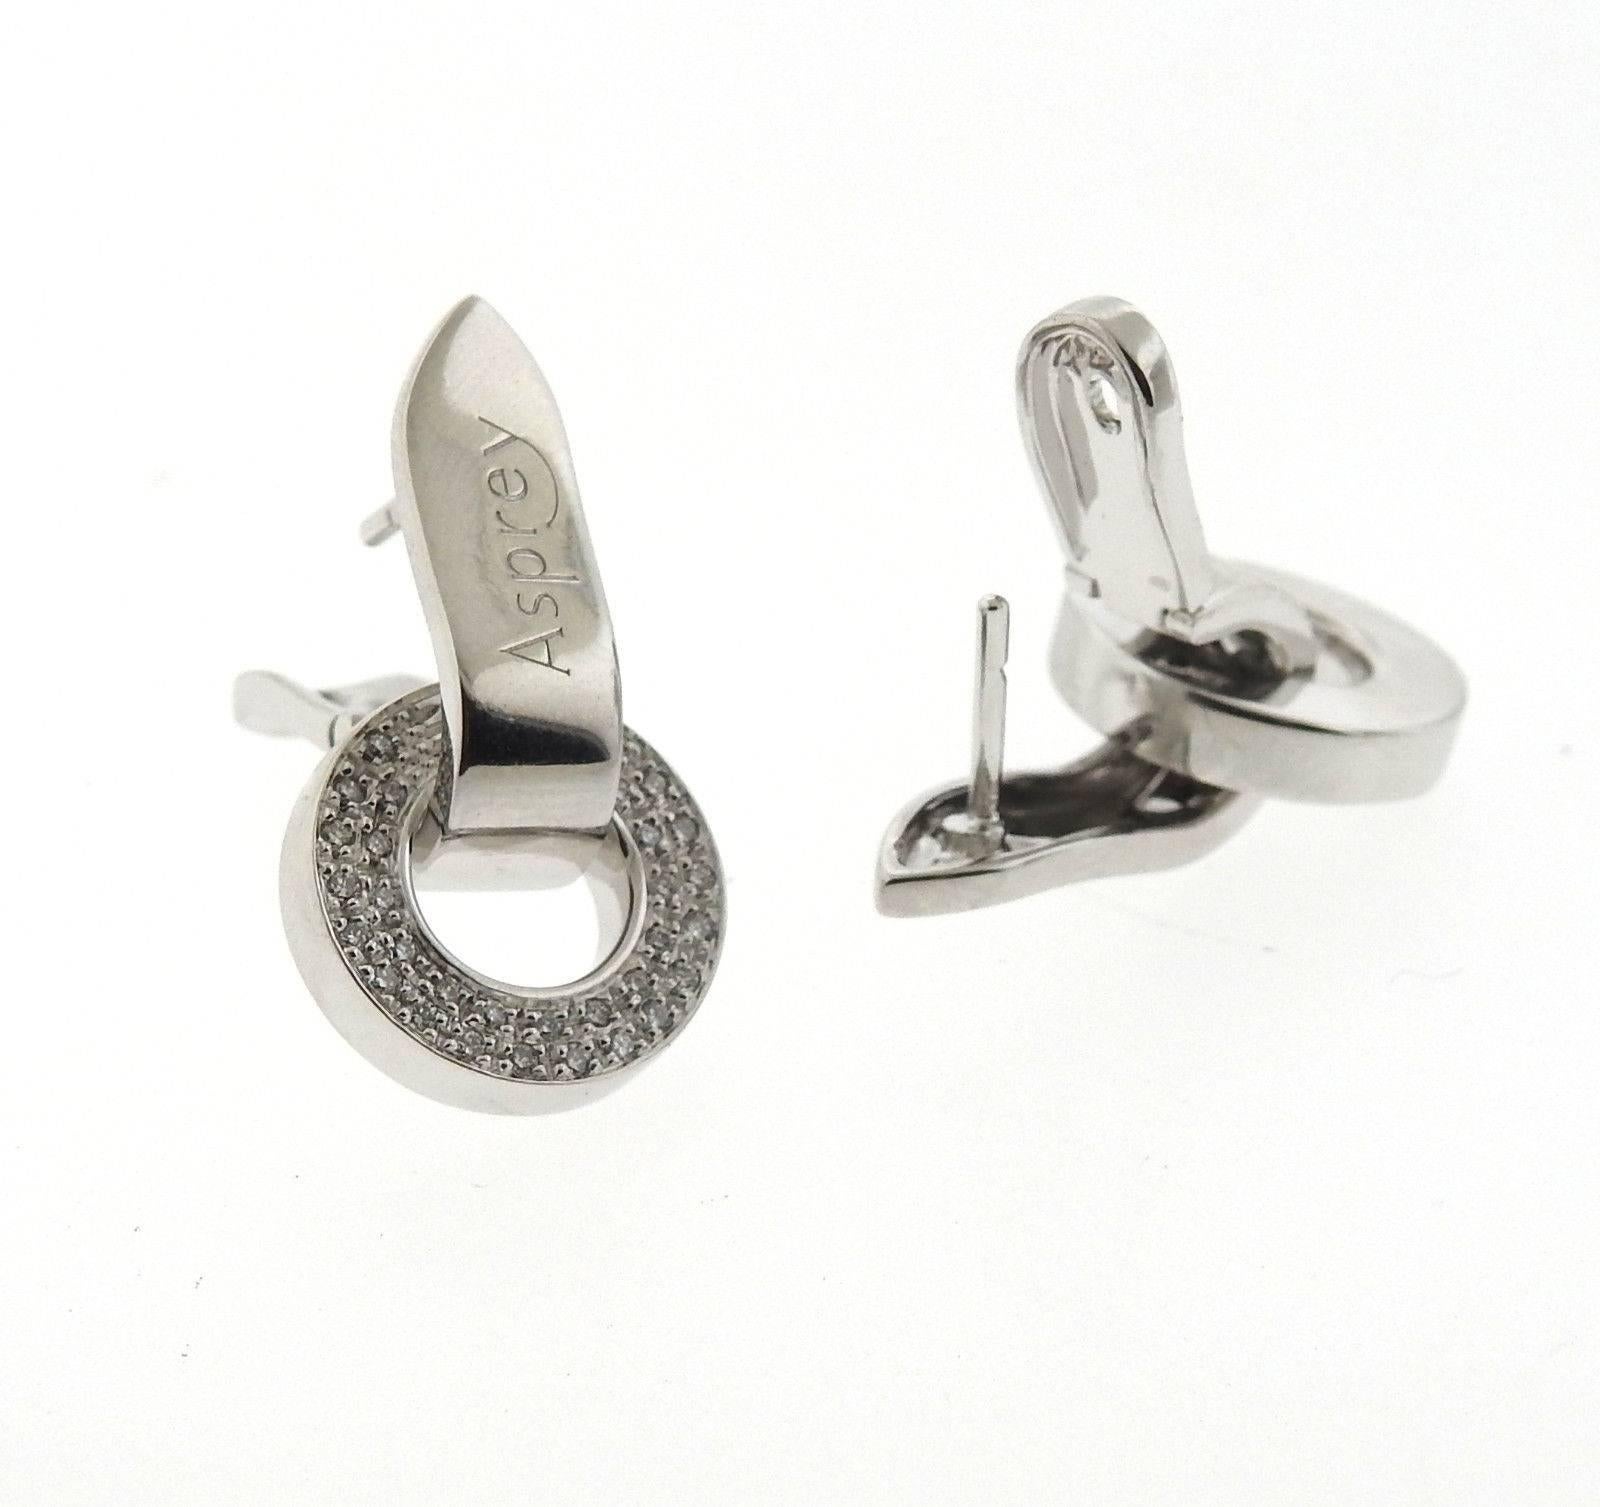 A pair of 18k white gold earrings set with approximately 0.40ctw of G/VS diamonds.  The earrings measure 27mm x 15mm  and weigh 14.8 grams. Marked: Asprey, made in Italy, 750.